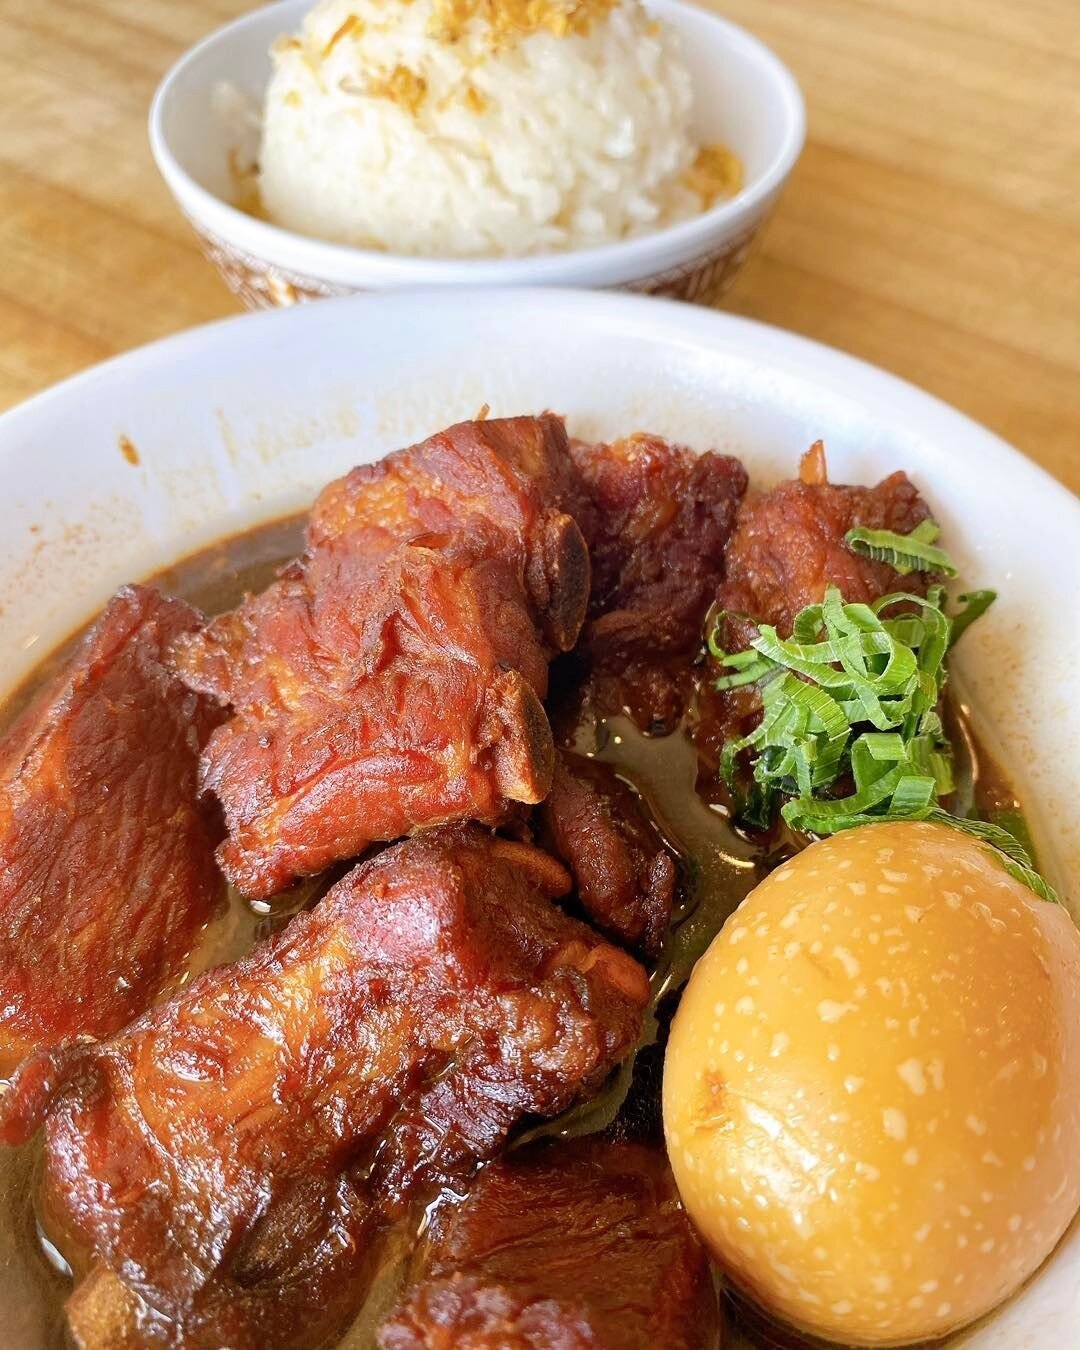 Special for Saturday, May 21:

Tom Khem $14 - Laotian braised pork, Spare ribs braised in light and dark soy sauce, galangal, ginger, garlic, served with egg, choice base

Garlic Ahi $20 - Ahi Pan seared with Garlic, deglazed with Chinese soy, charre